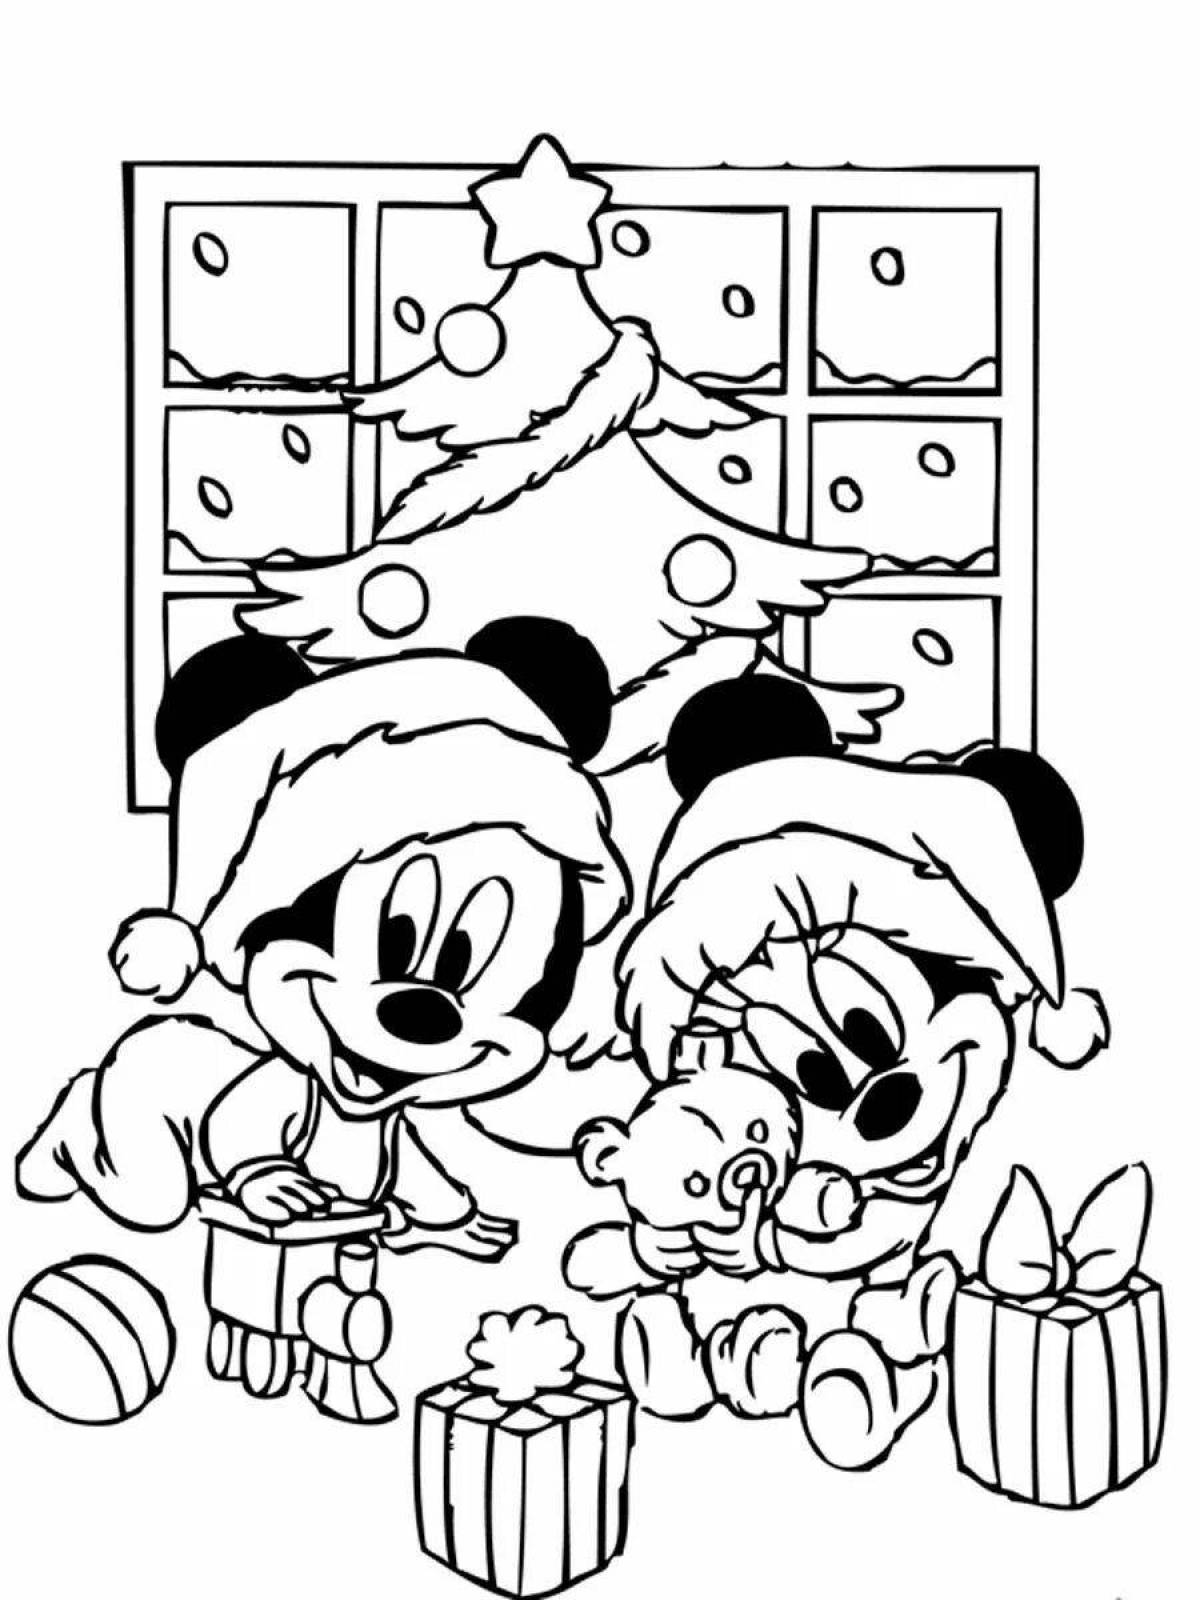 Mickey Mouse's playful Christmas coloring book